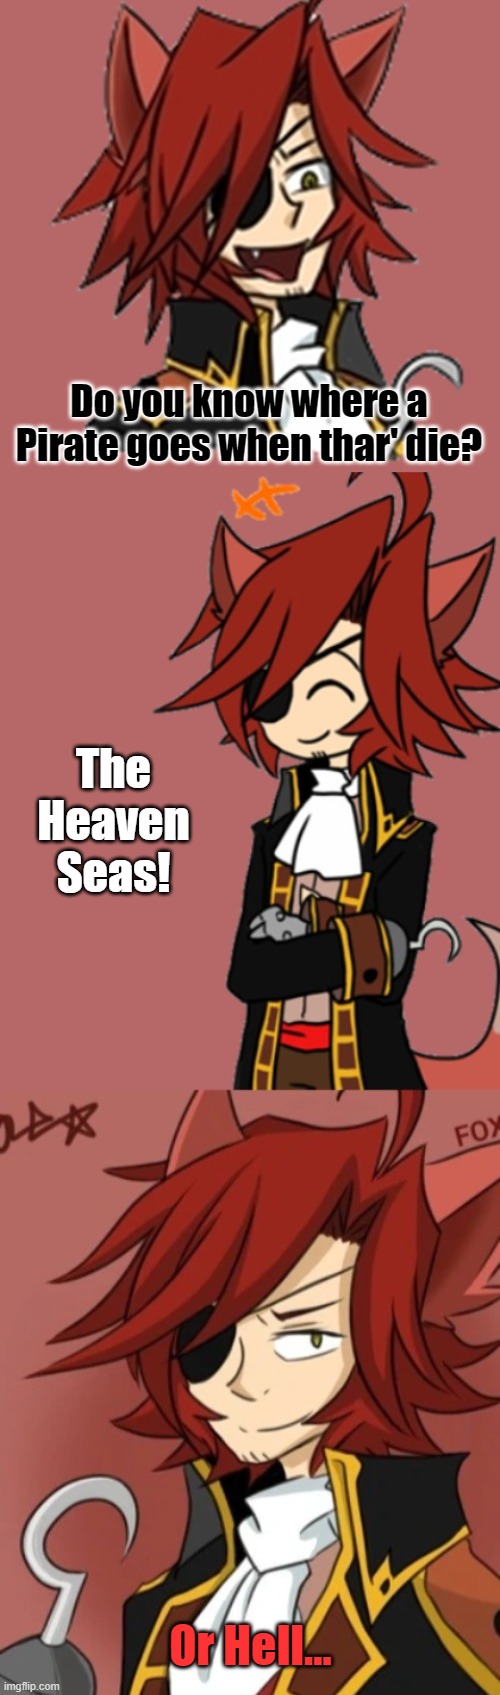 Bad Pun Foxy | Do you know where a Pirate goes when thar' die? The Heaven Seas! Or Hell... | image tagged in bad pun foxy,foxy,foxy five nights at freddy's,sorry not sorry,pirates,death | made w/ Imgflip meme maker